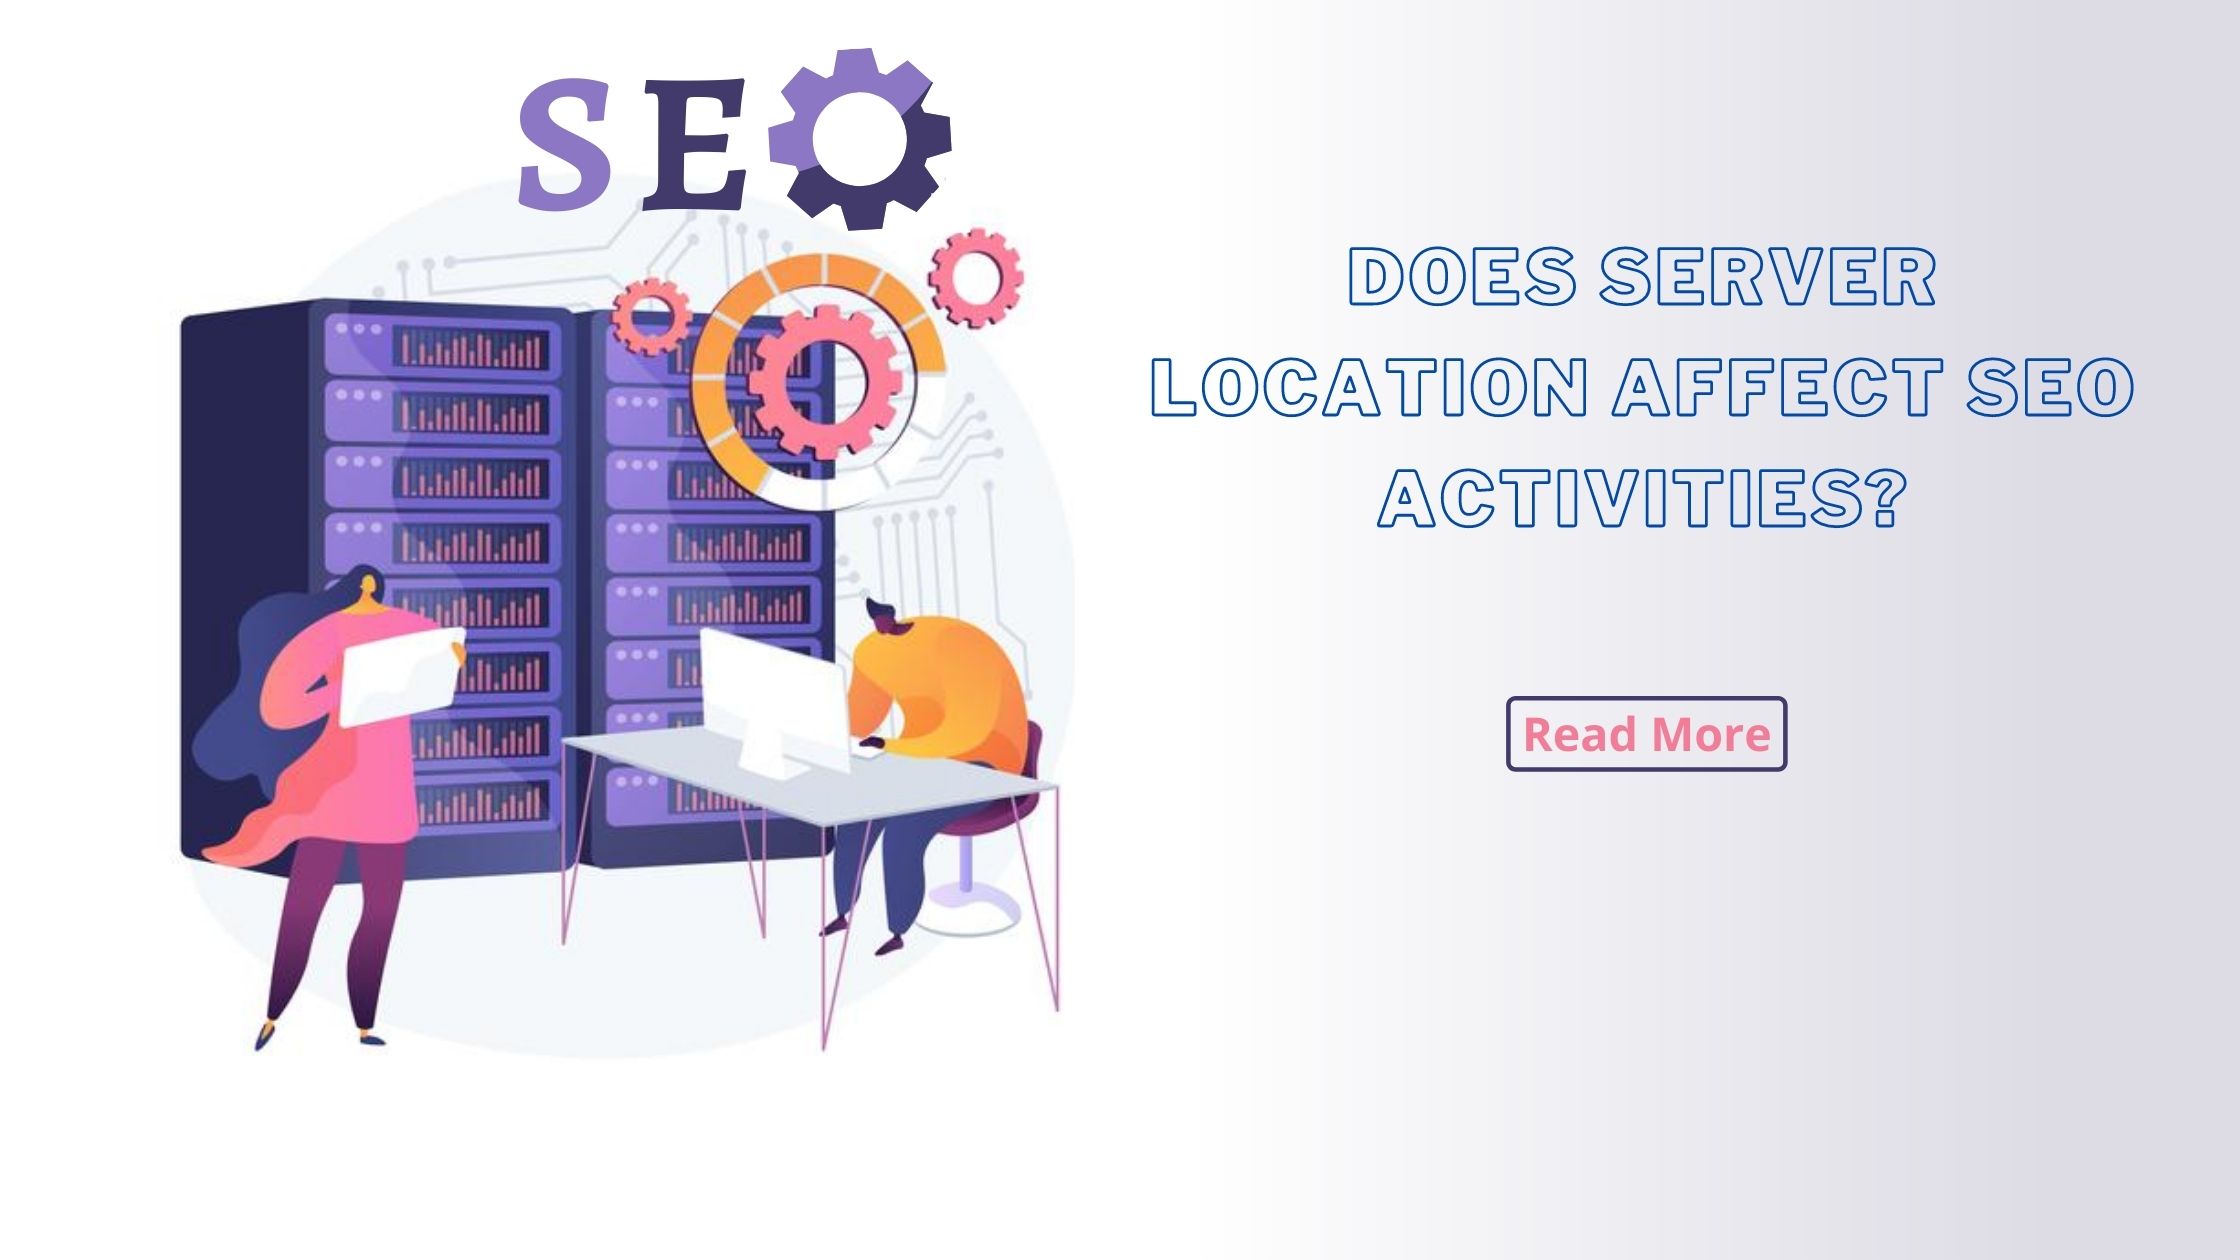 Does Server Location Affect SEO Activities?